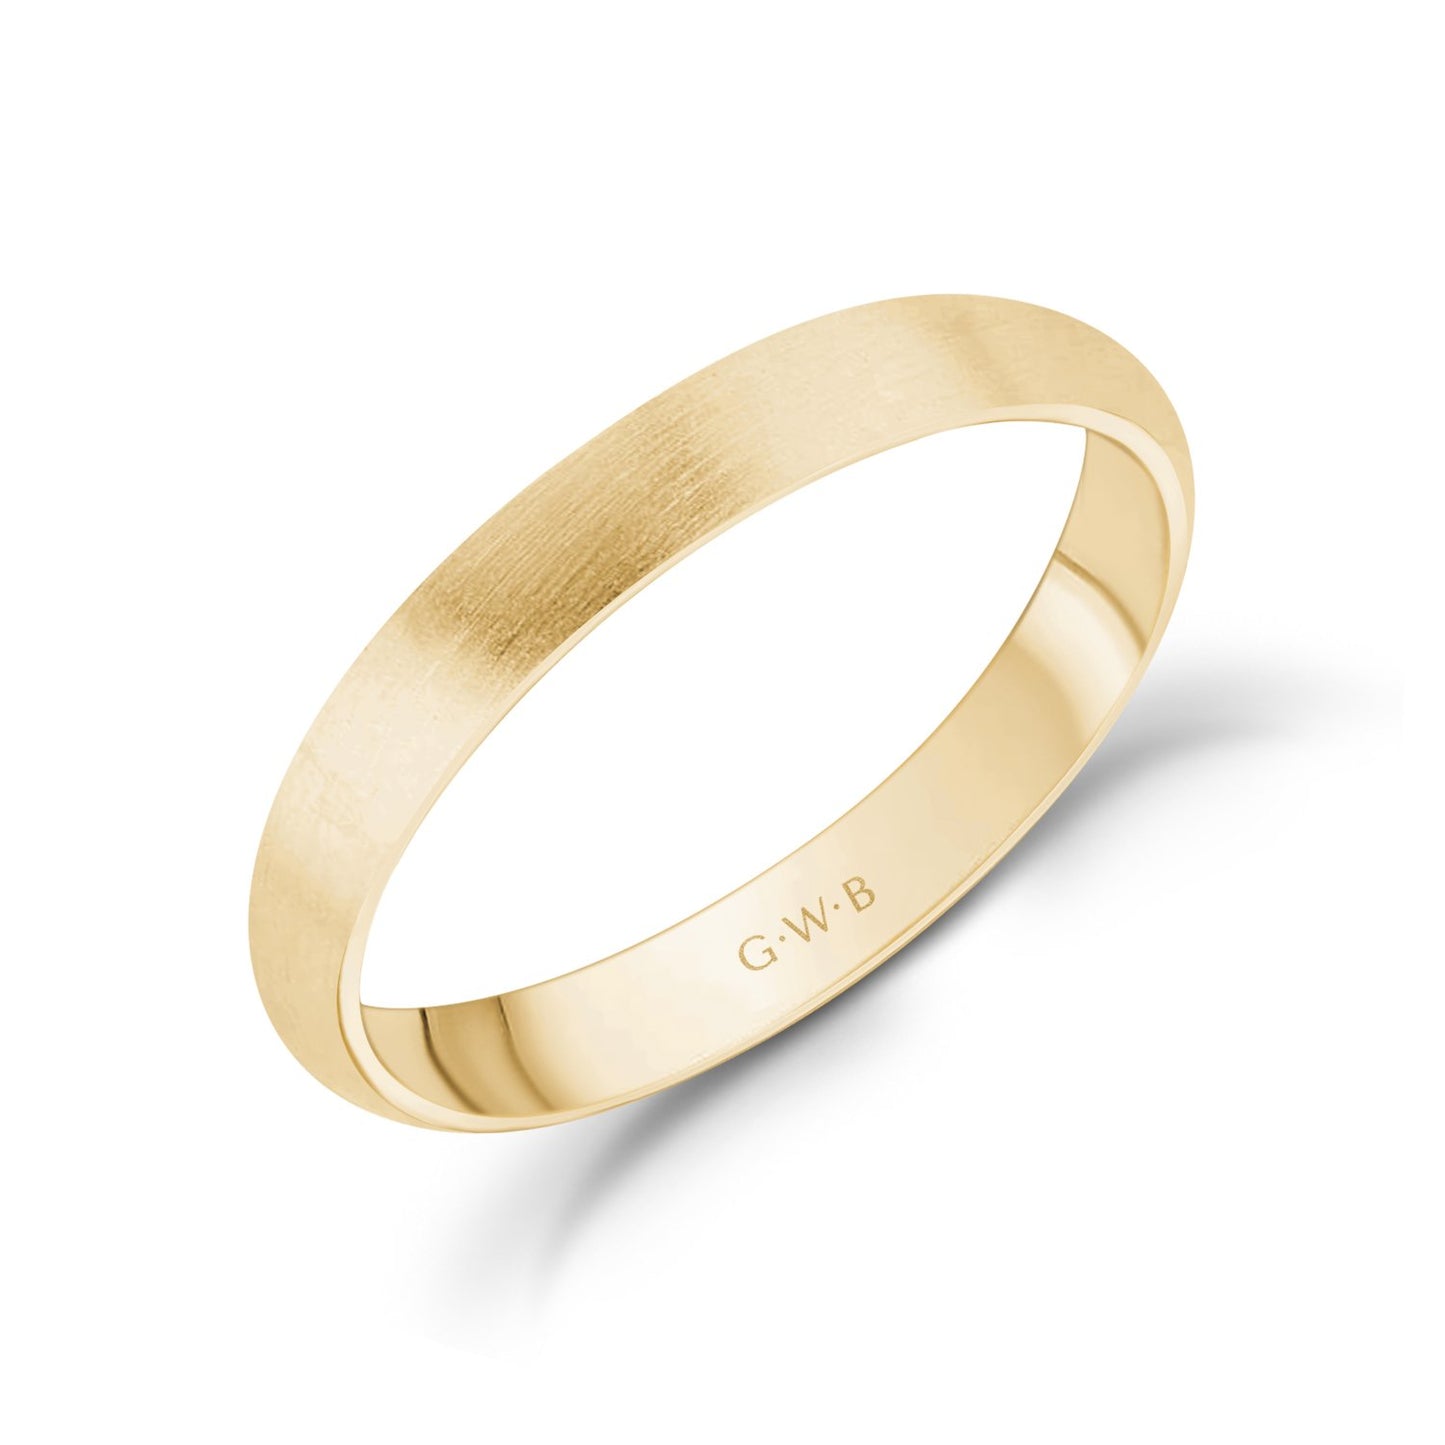 3mm 14K Gold Brushed Dome Wedding Band - G.W Bands